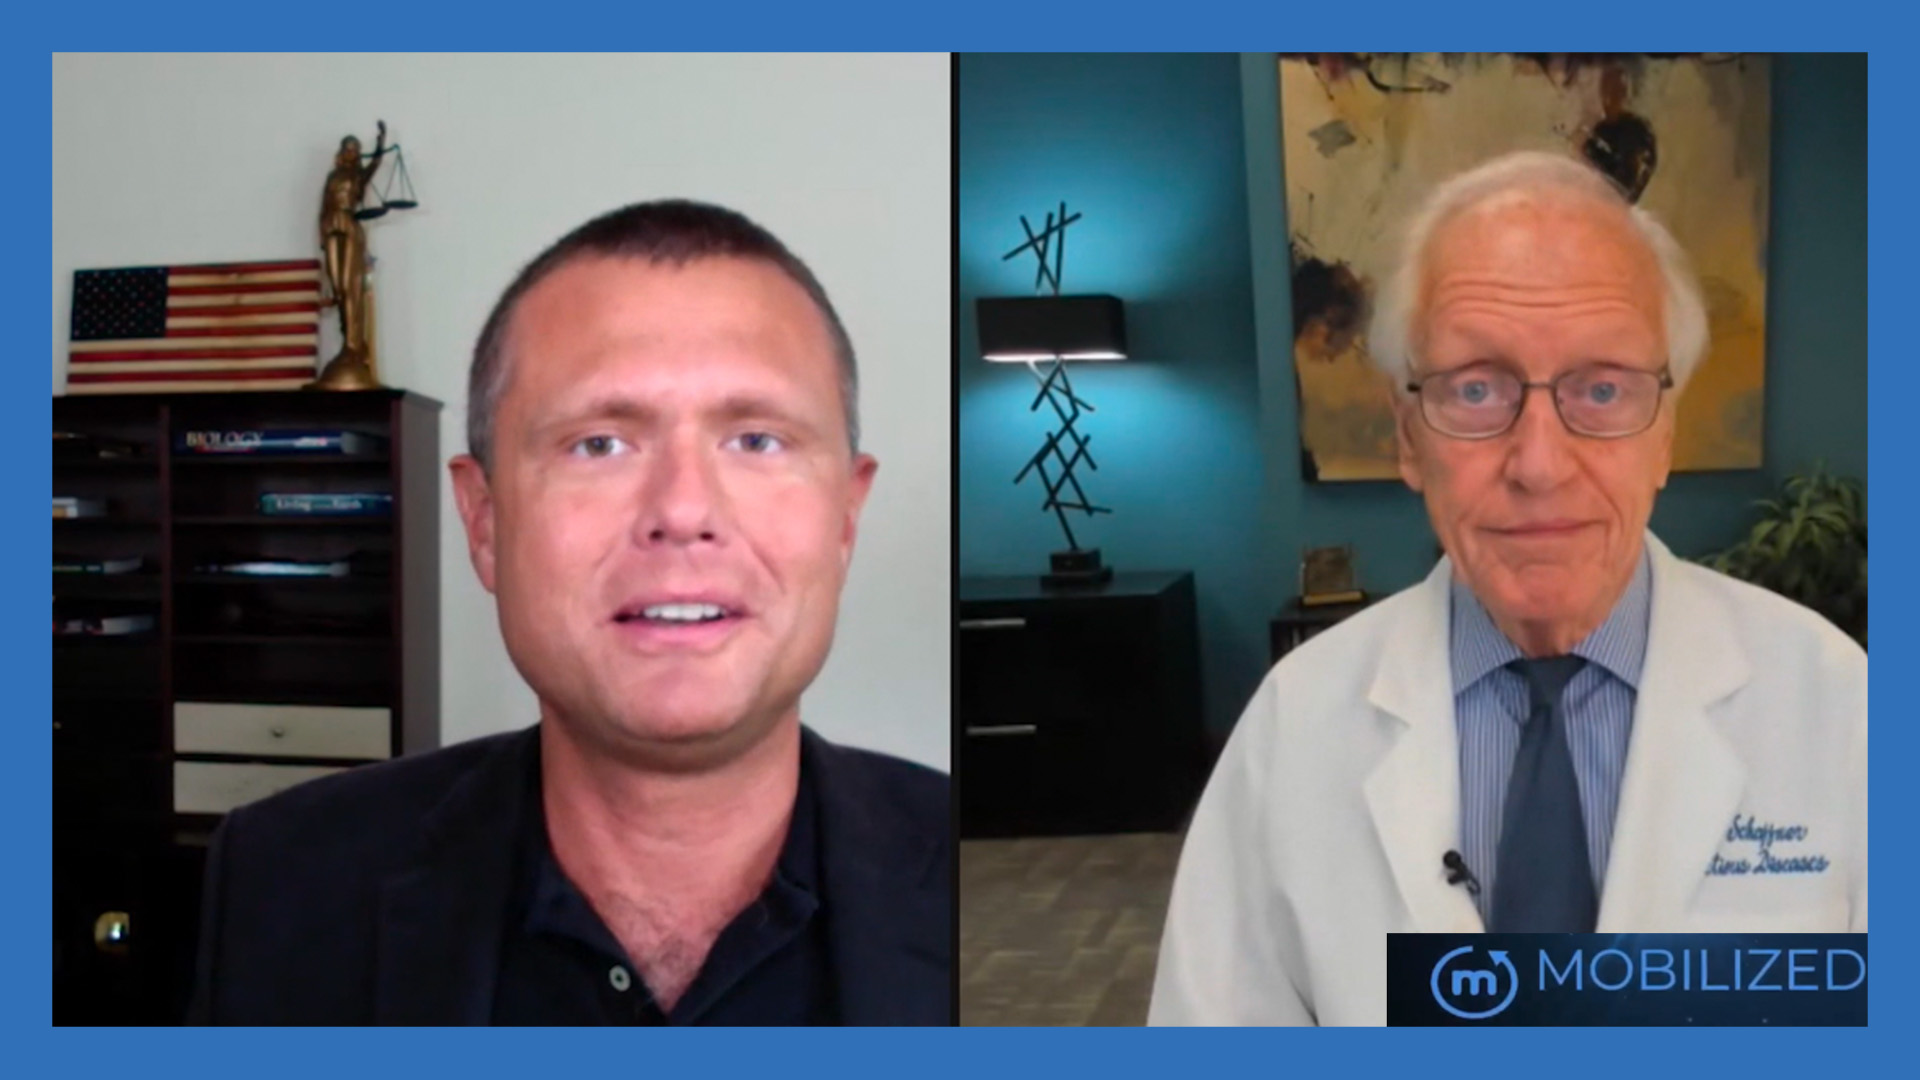 Tonight on Mobilized: Covid-19 Updates with Dr. Bill Schaffner